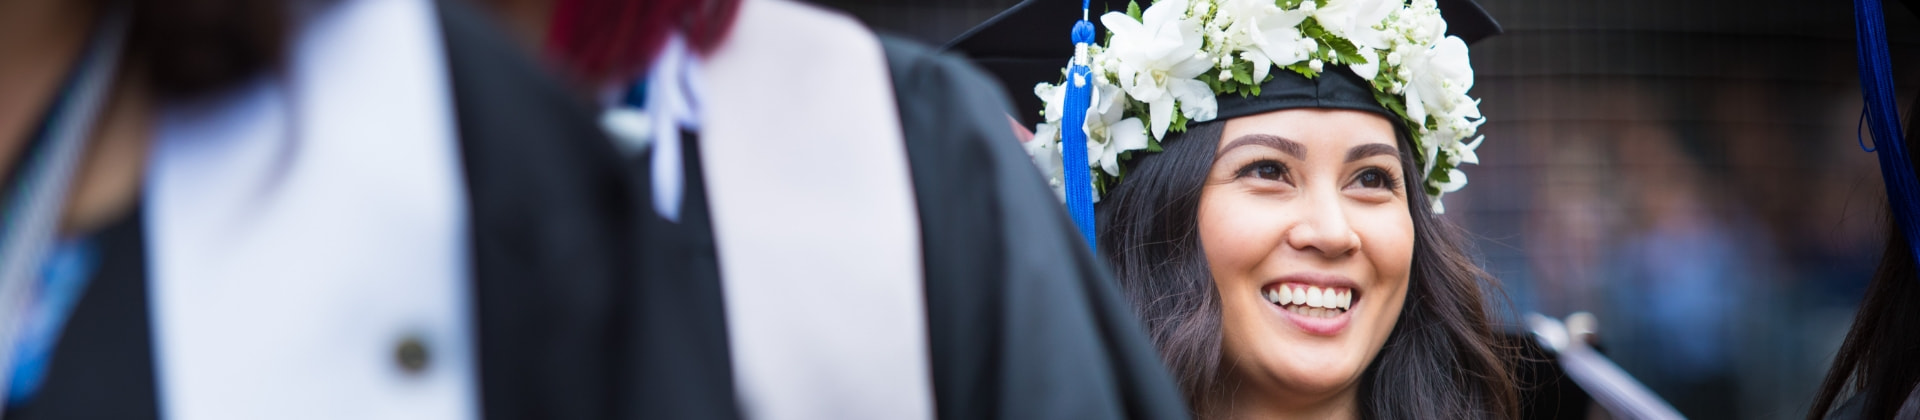  a line of college graduates, with  the focus on a woman wearing a cap decorated in white flowers